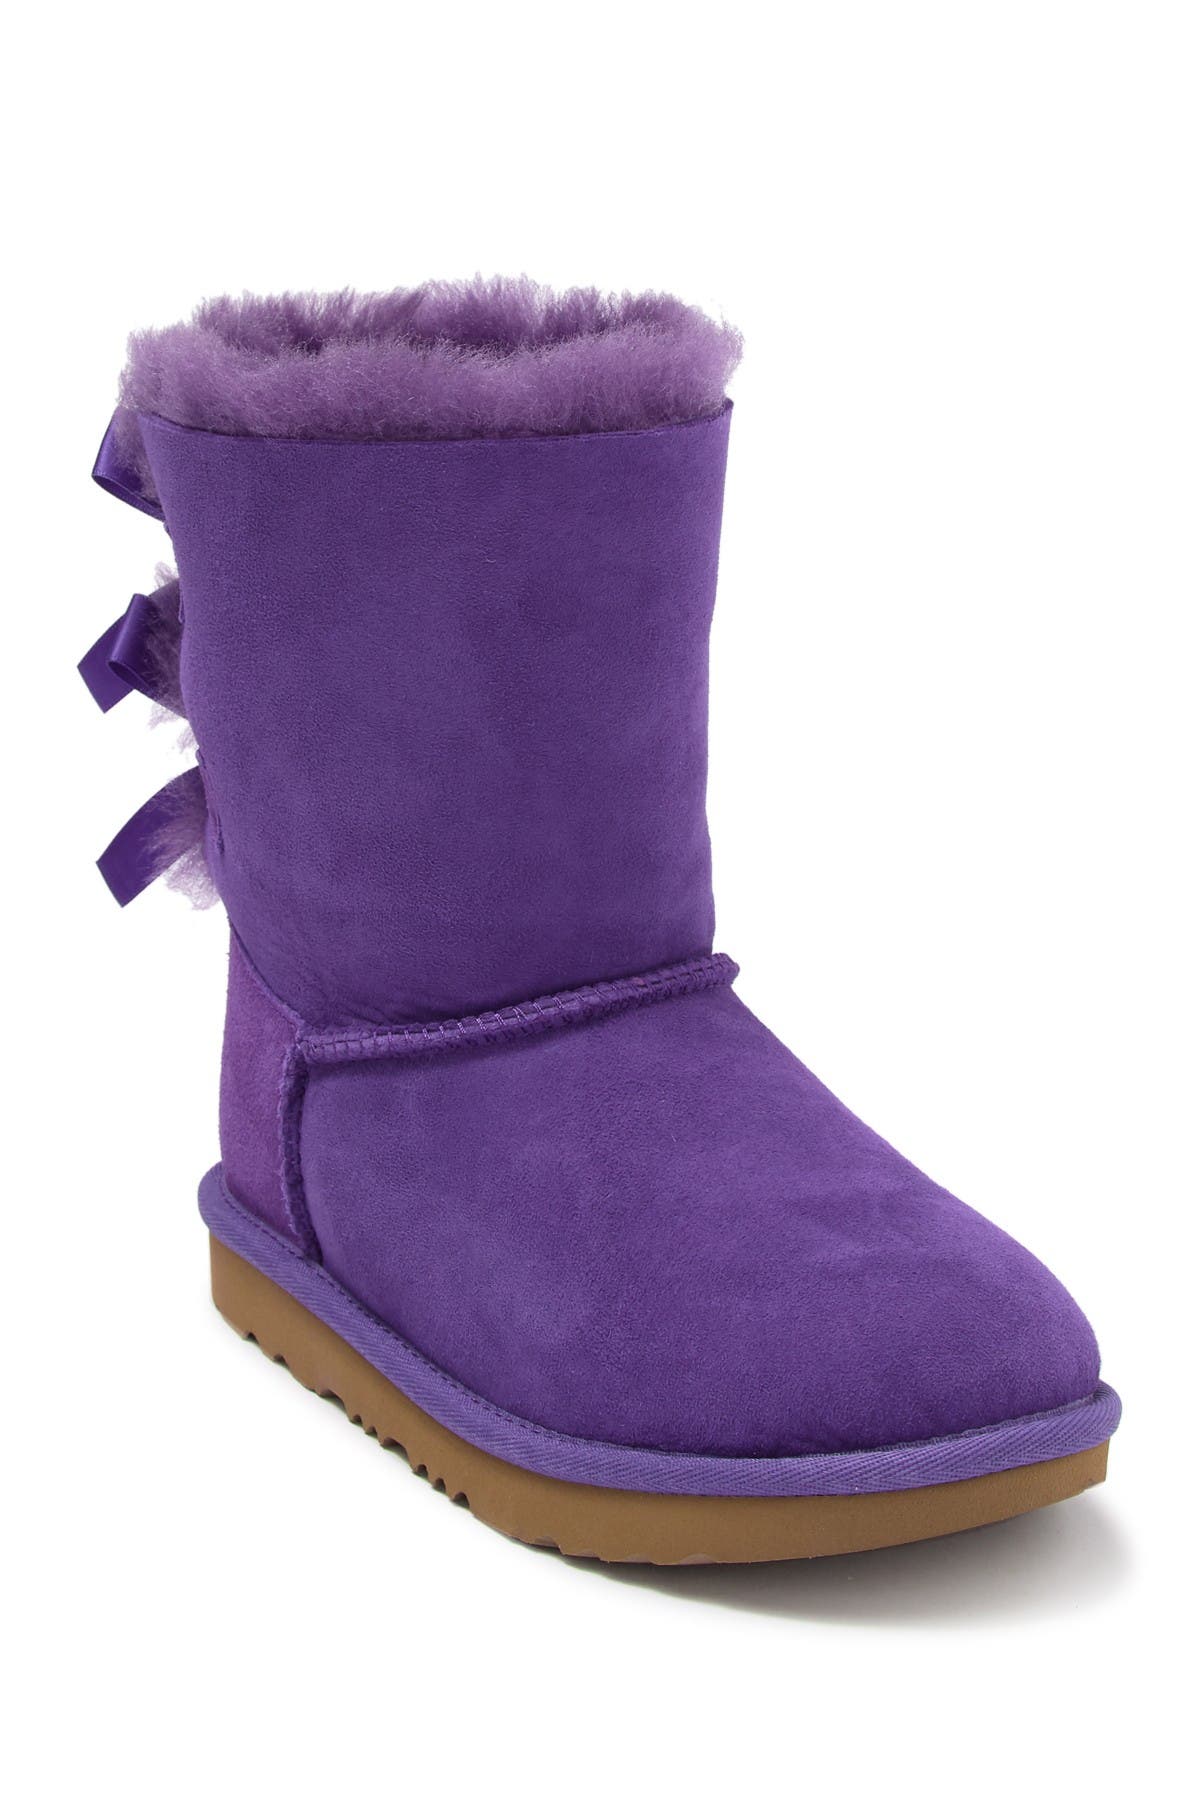 cheap ugg bailey bow boots